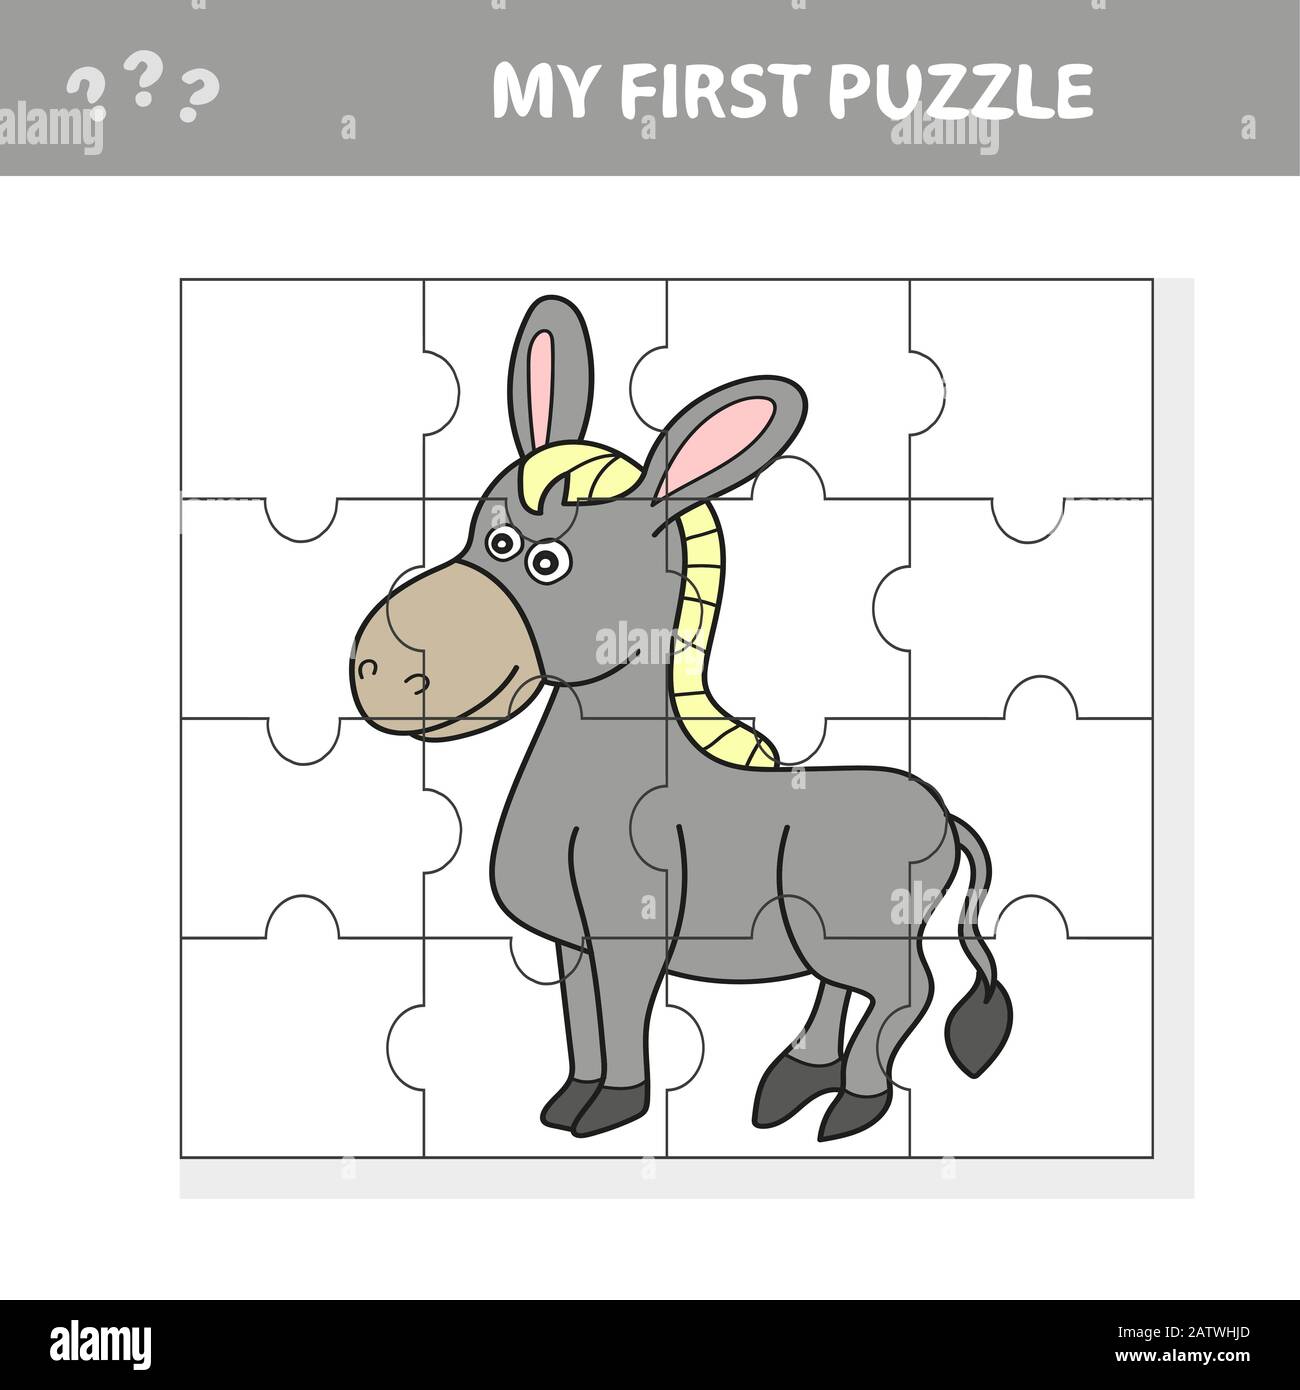 Cartoon Vector Illustration of Education Jigsaw Puzzle Game for Preschool Children with Funny Donkey Farm Animal - My first puzzle Stock Vector